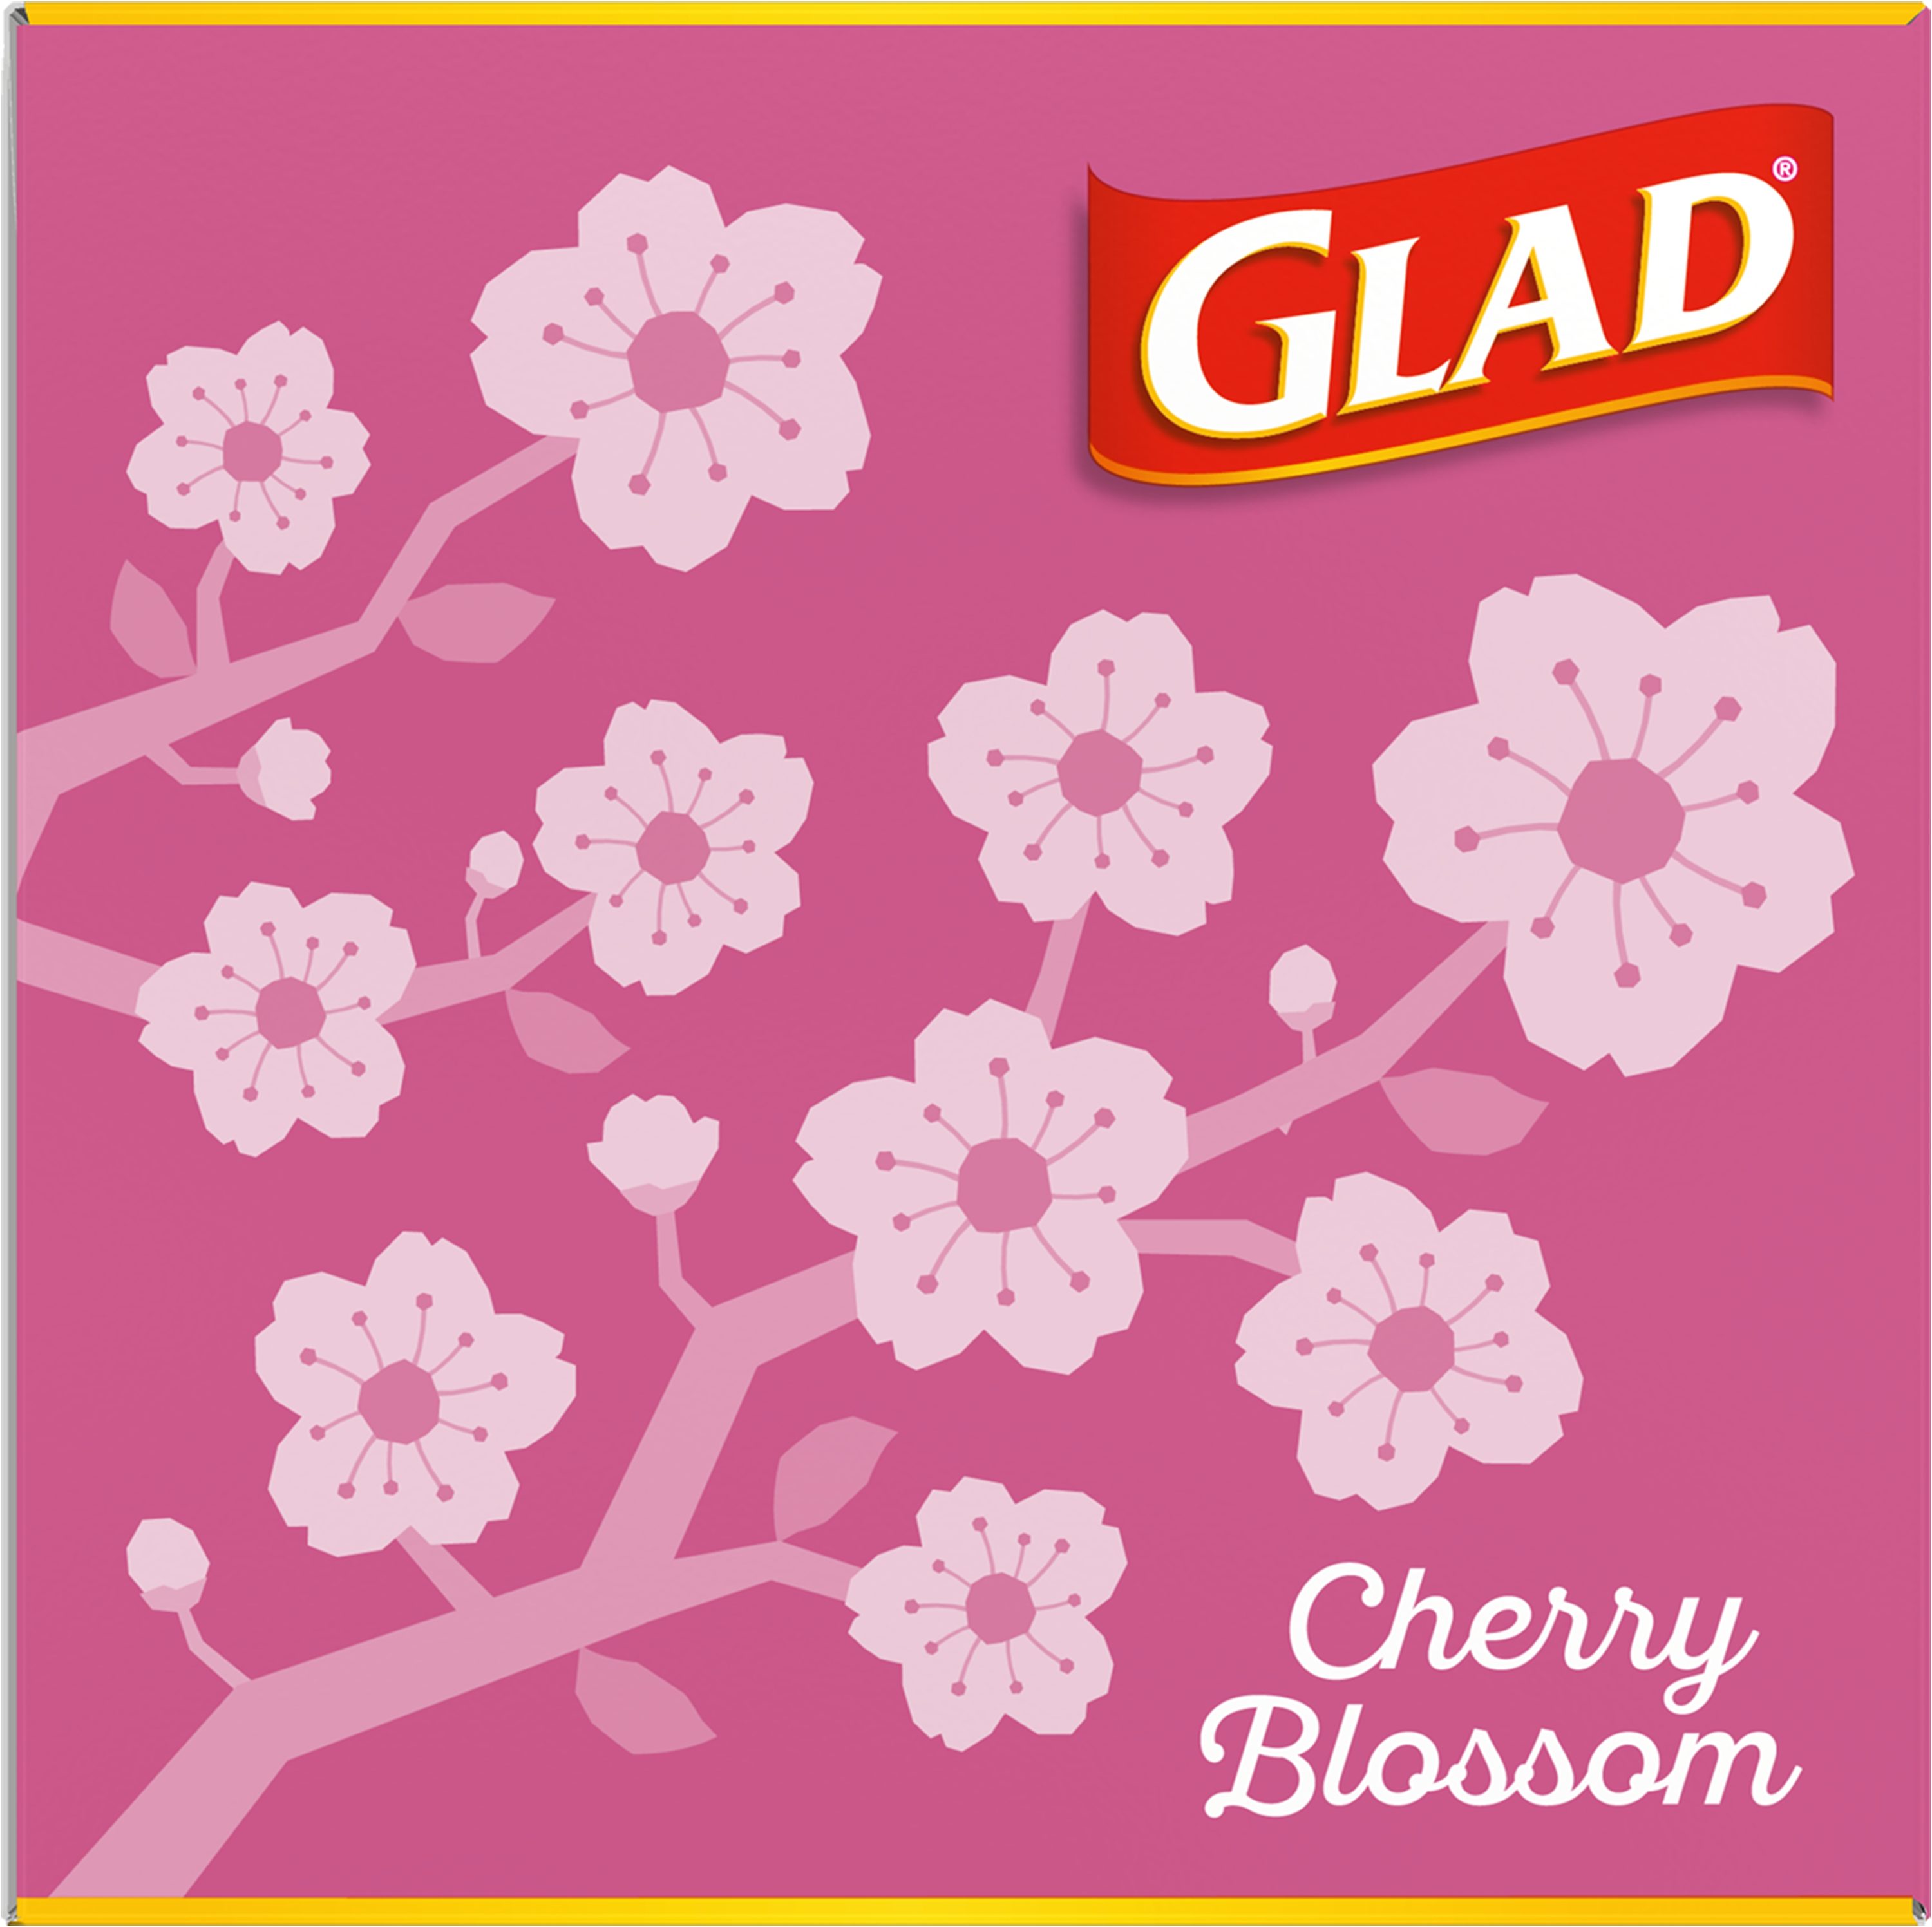 Introducing the newest Glad ForceFlexPlus Cherry Blossom scent – the  happiest trash bag! 💗 With a long-lasting scent, pretty pink color, and, By PINCHme